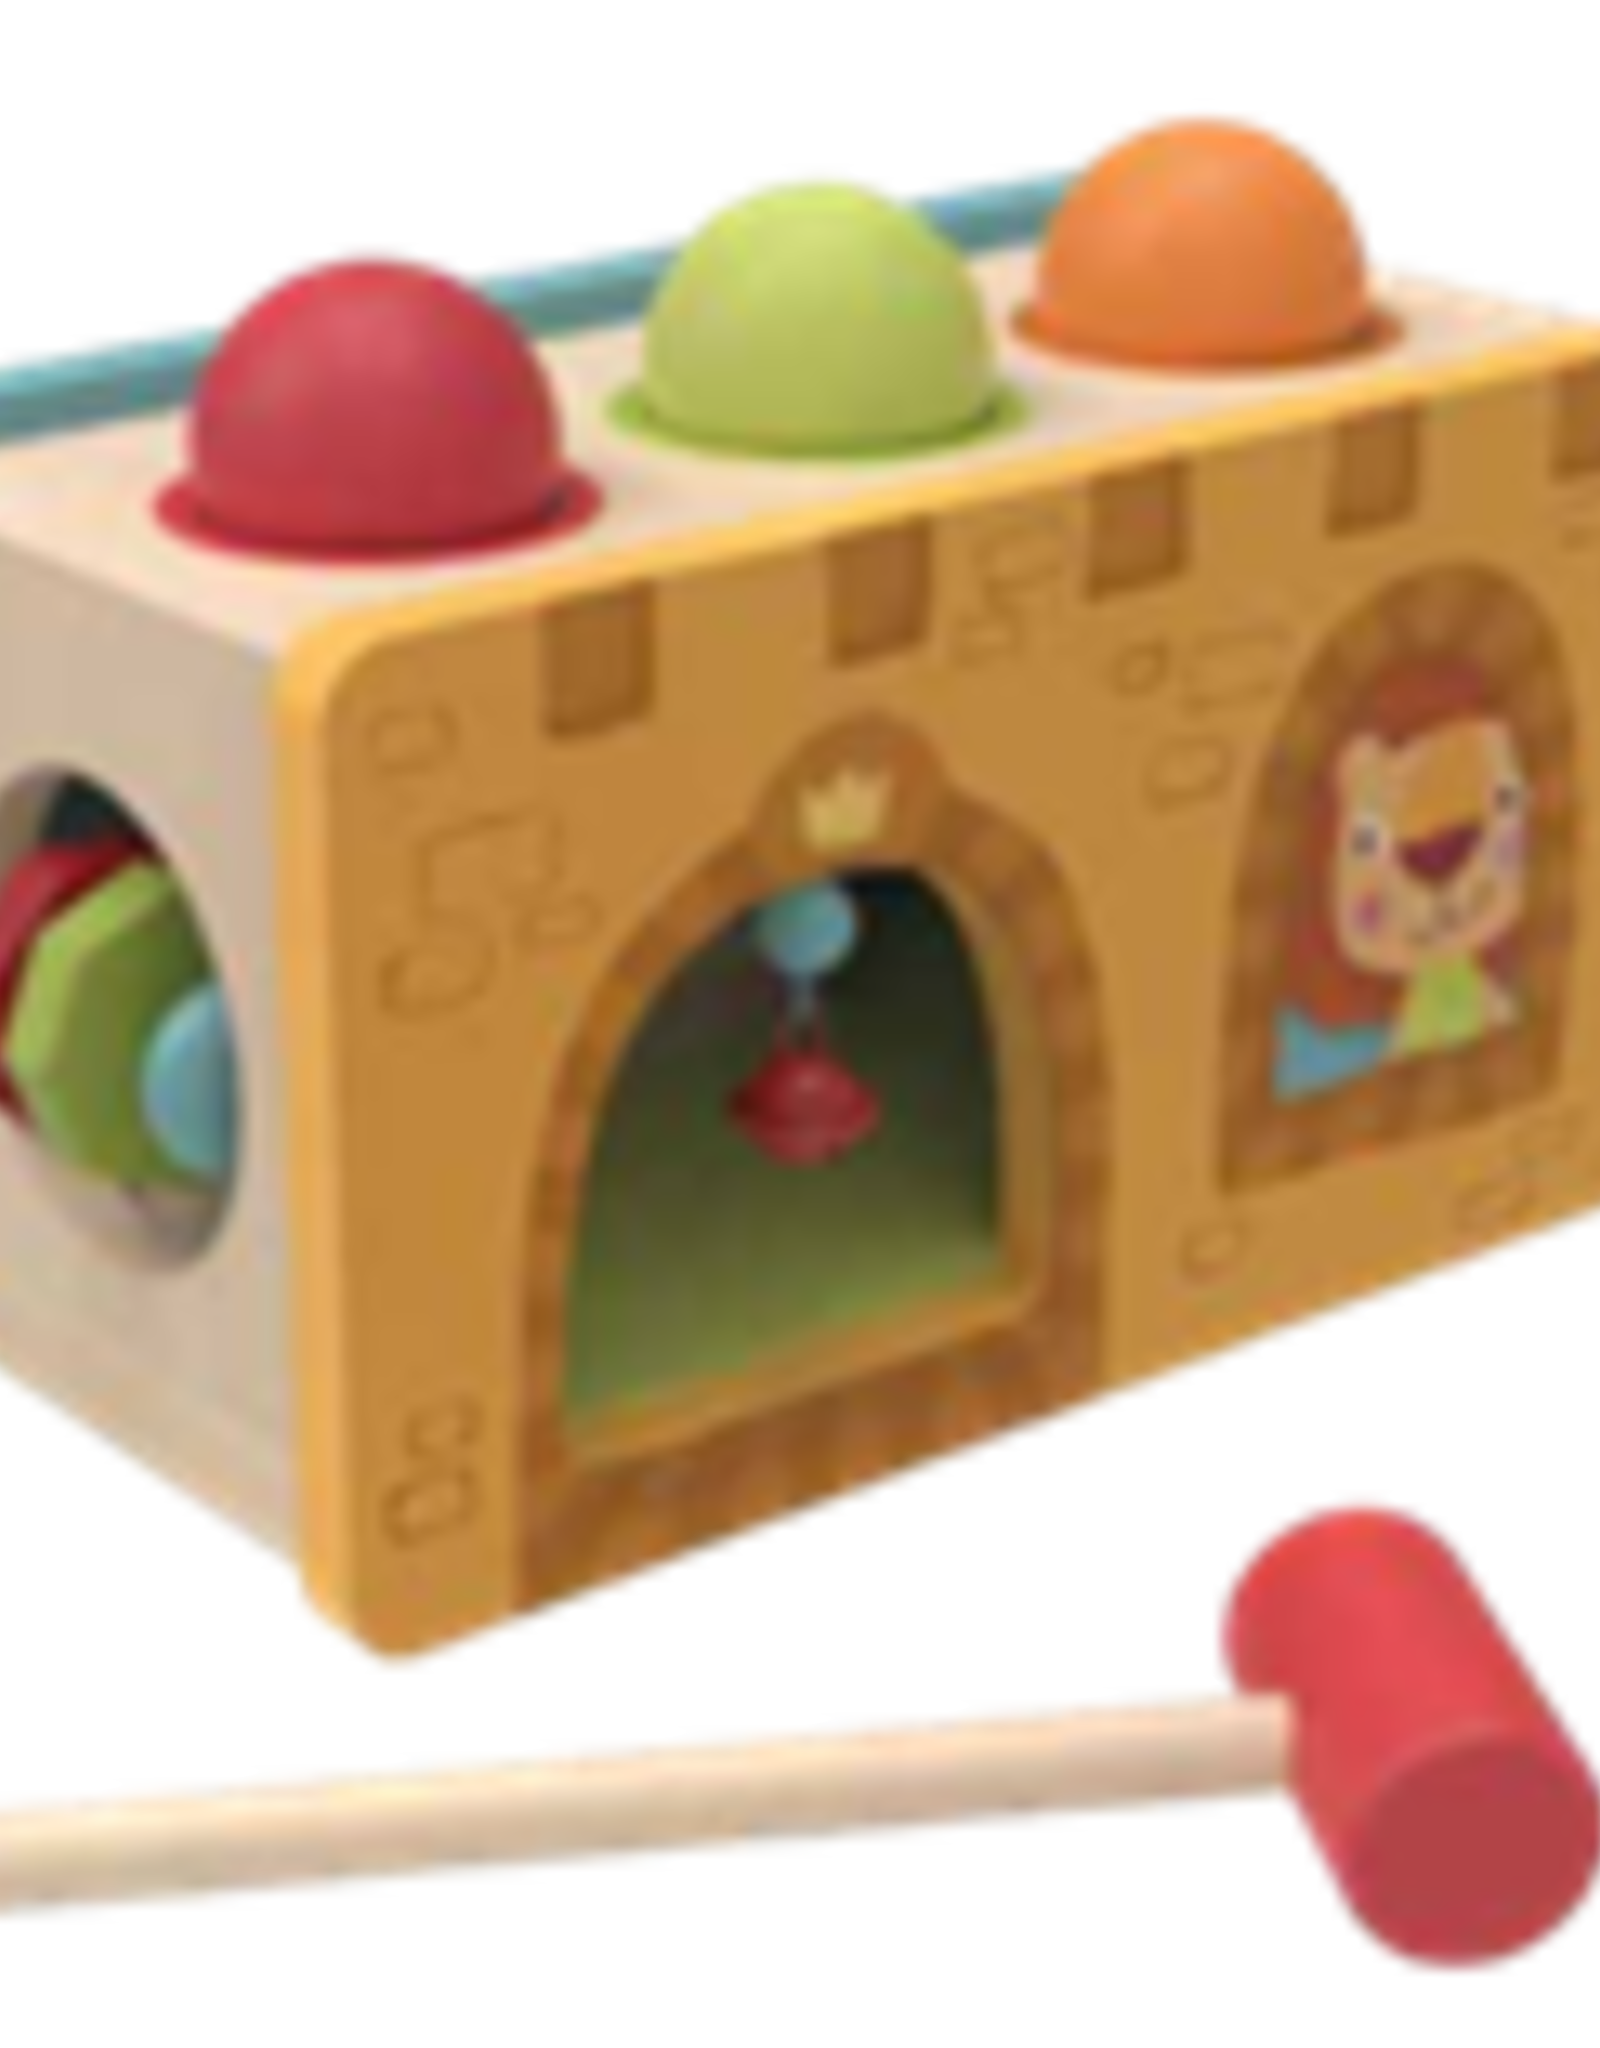 Little Castle Pound and Roll Toy